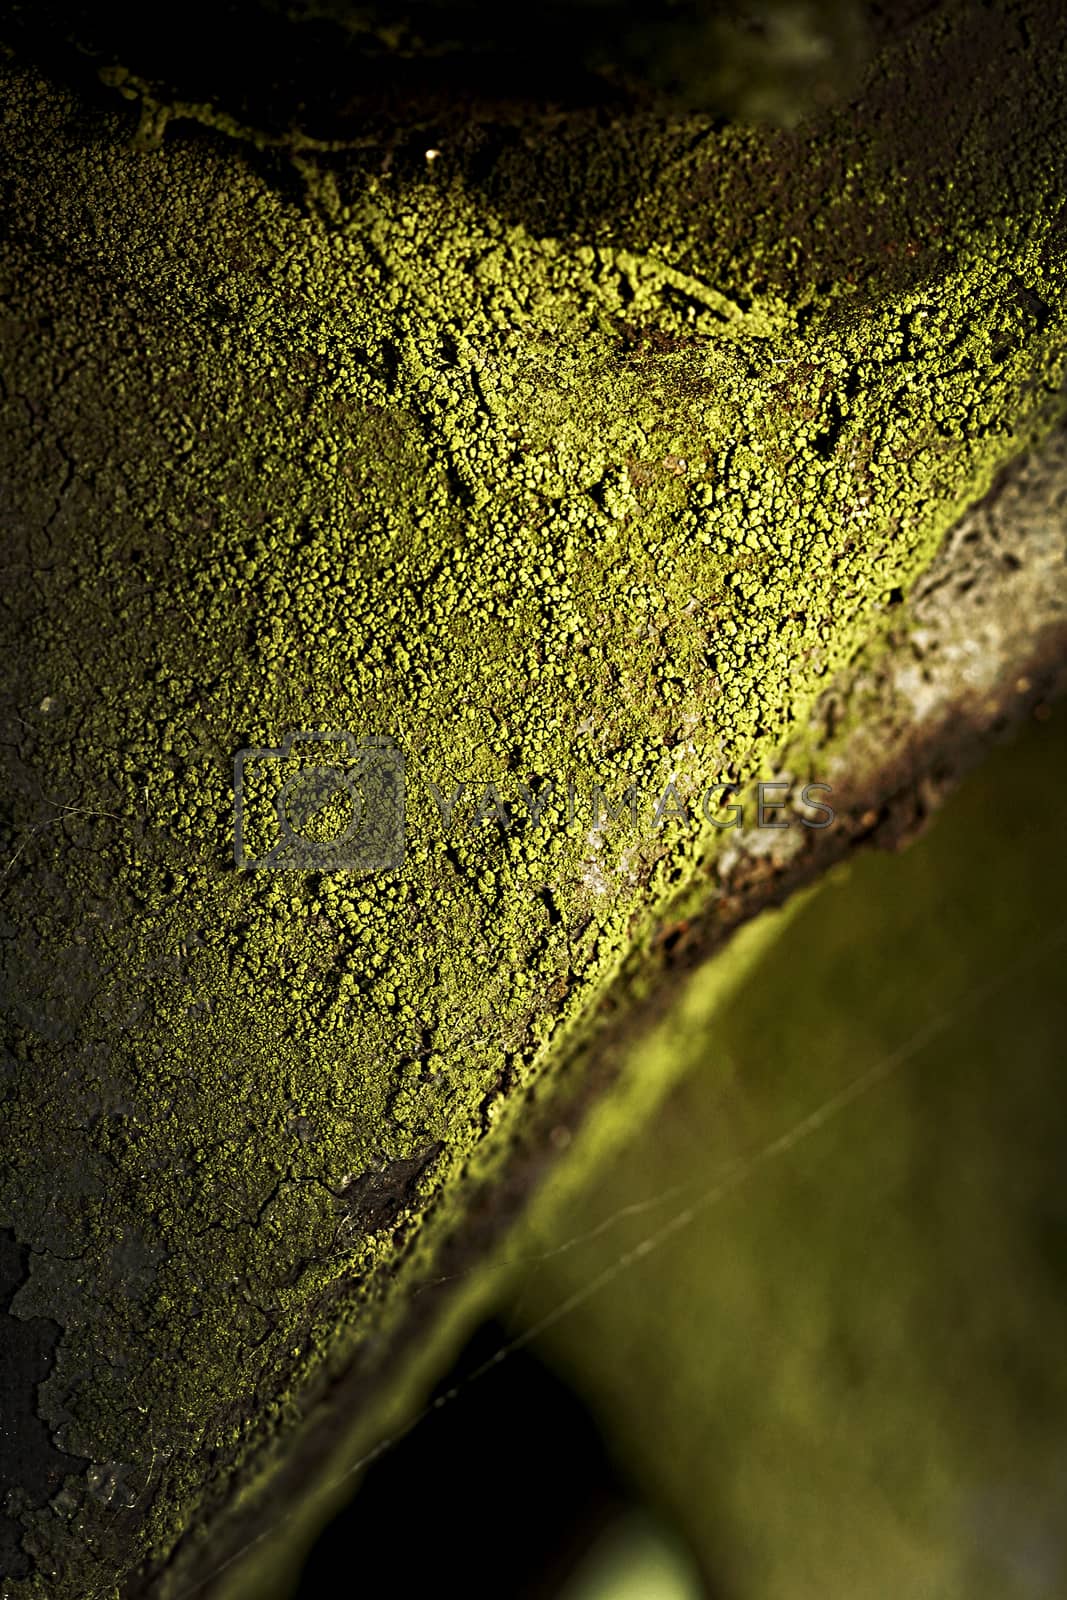 Royalty free image of Rusty old metal machine covered with moss by PeterHofstetter